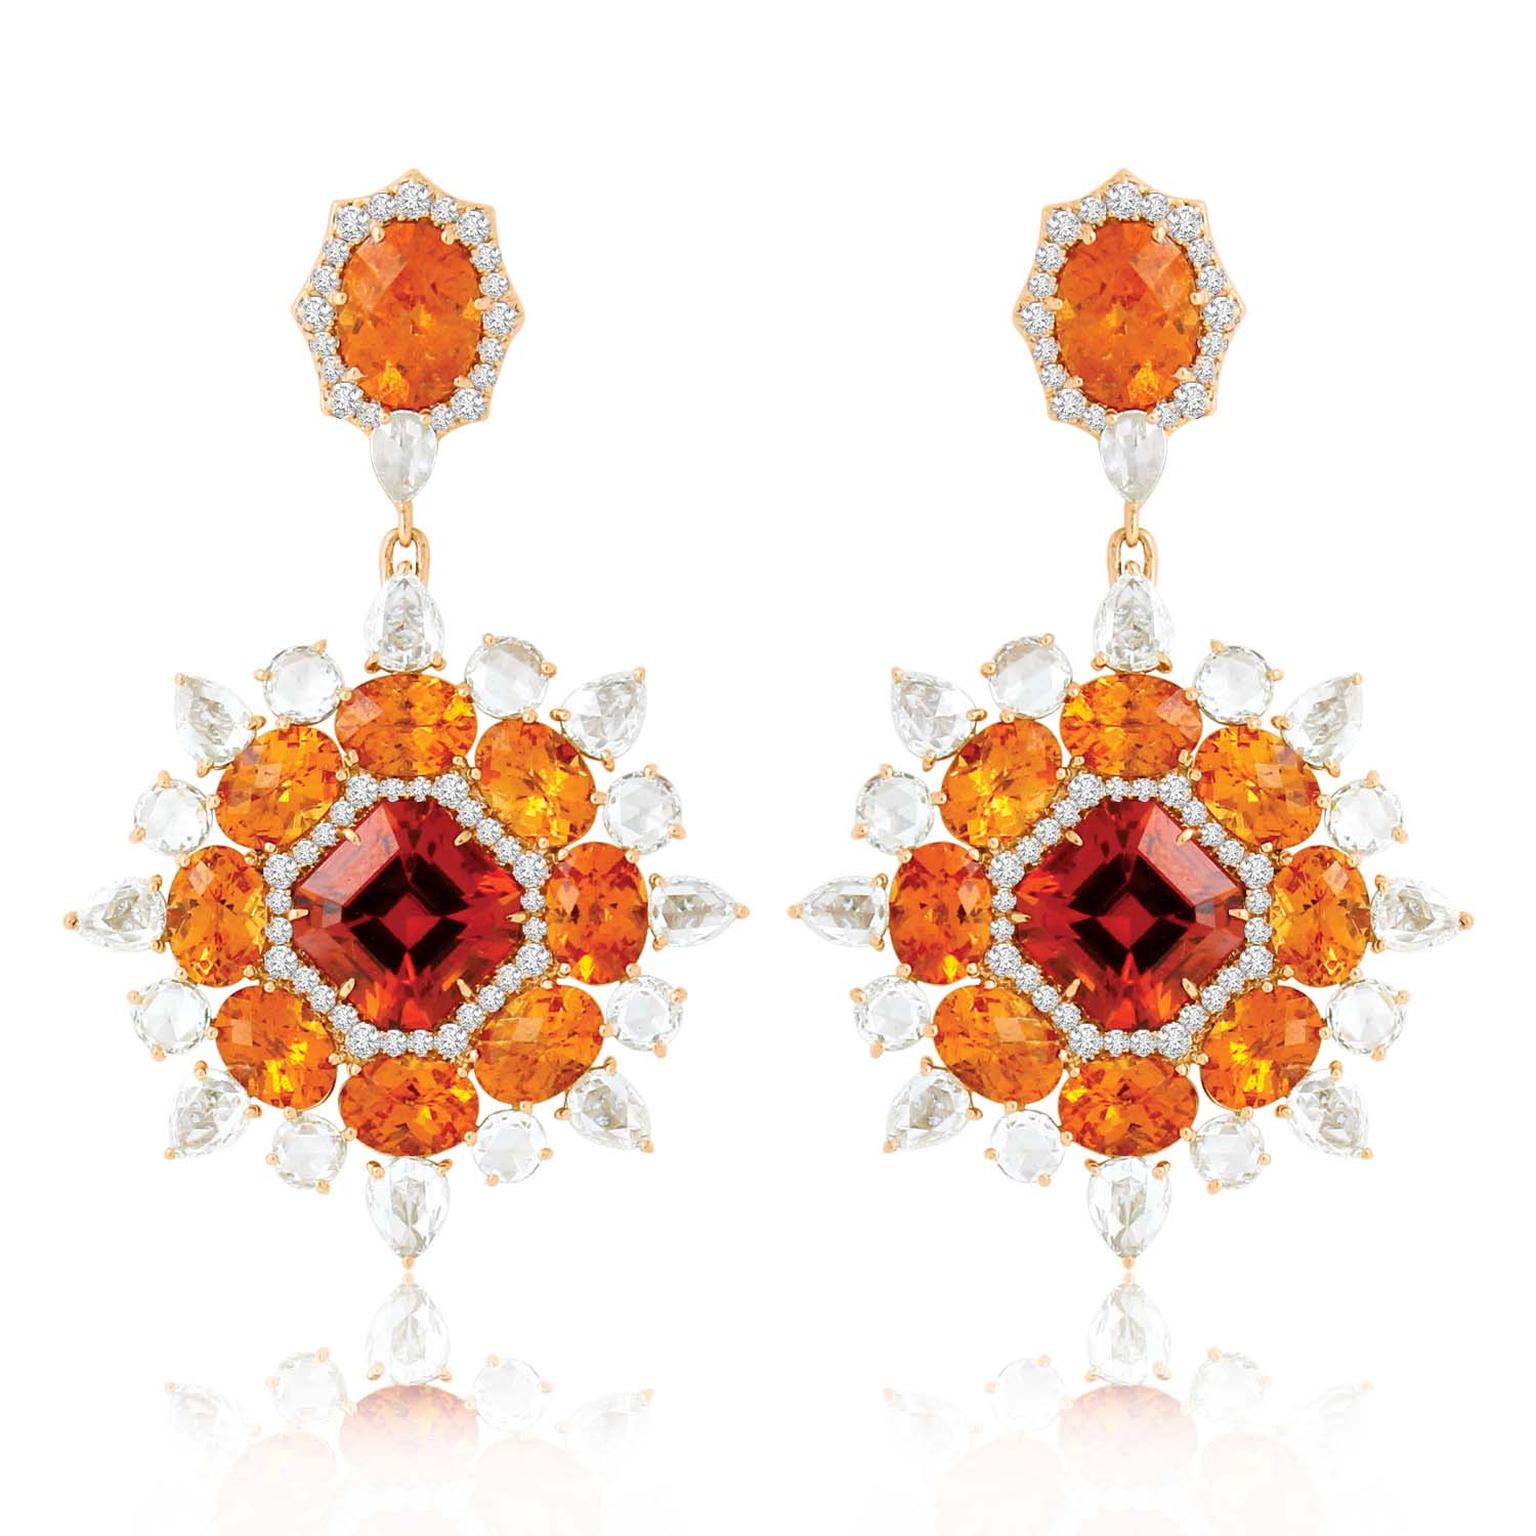 Sutra earrings with Mandarin garnets and diamonds in white gold.